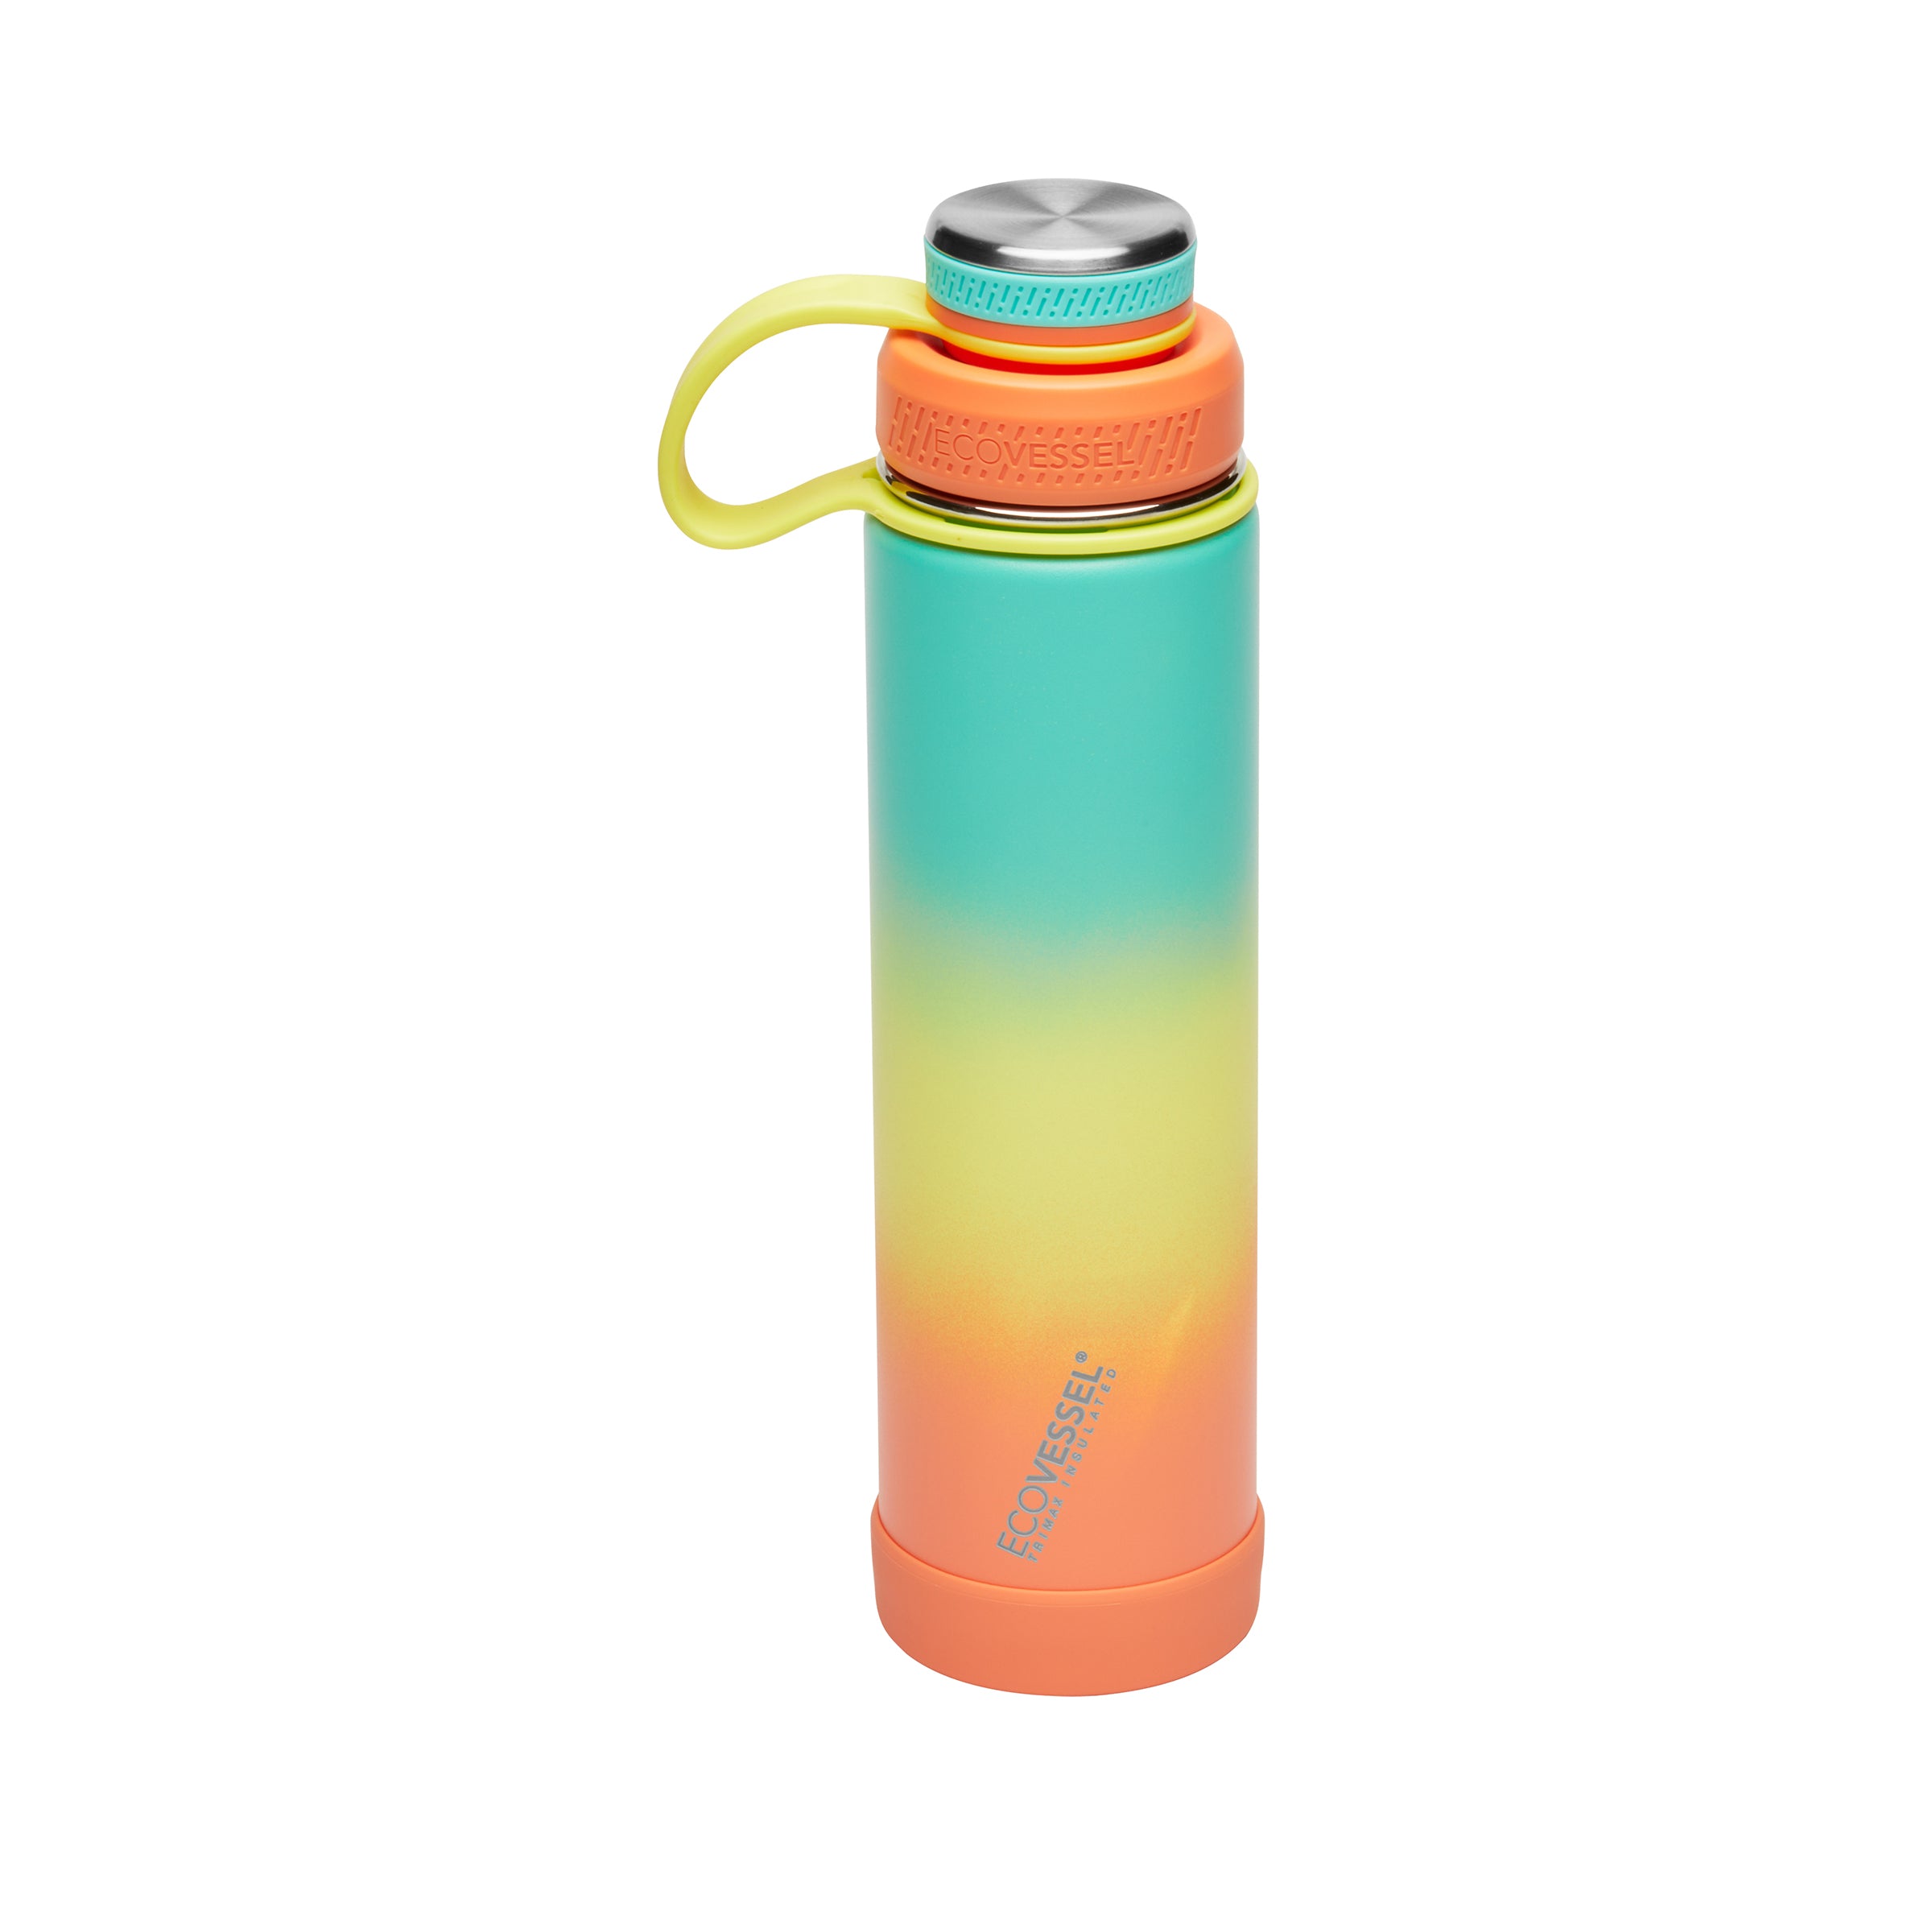 THE BOULDER Insulated Water Bottle with Strainer - 24 oz